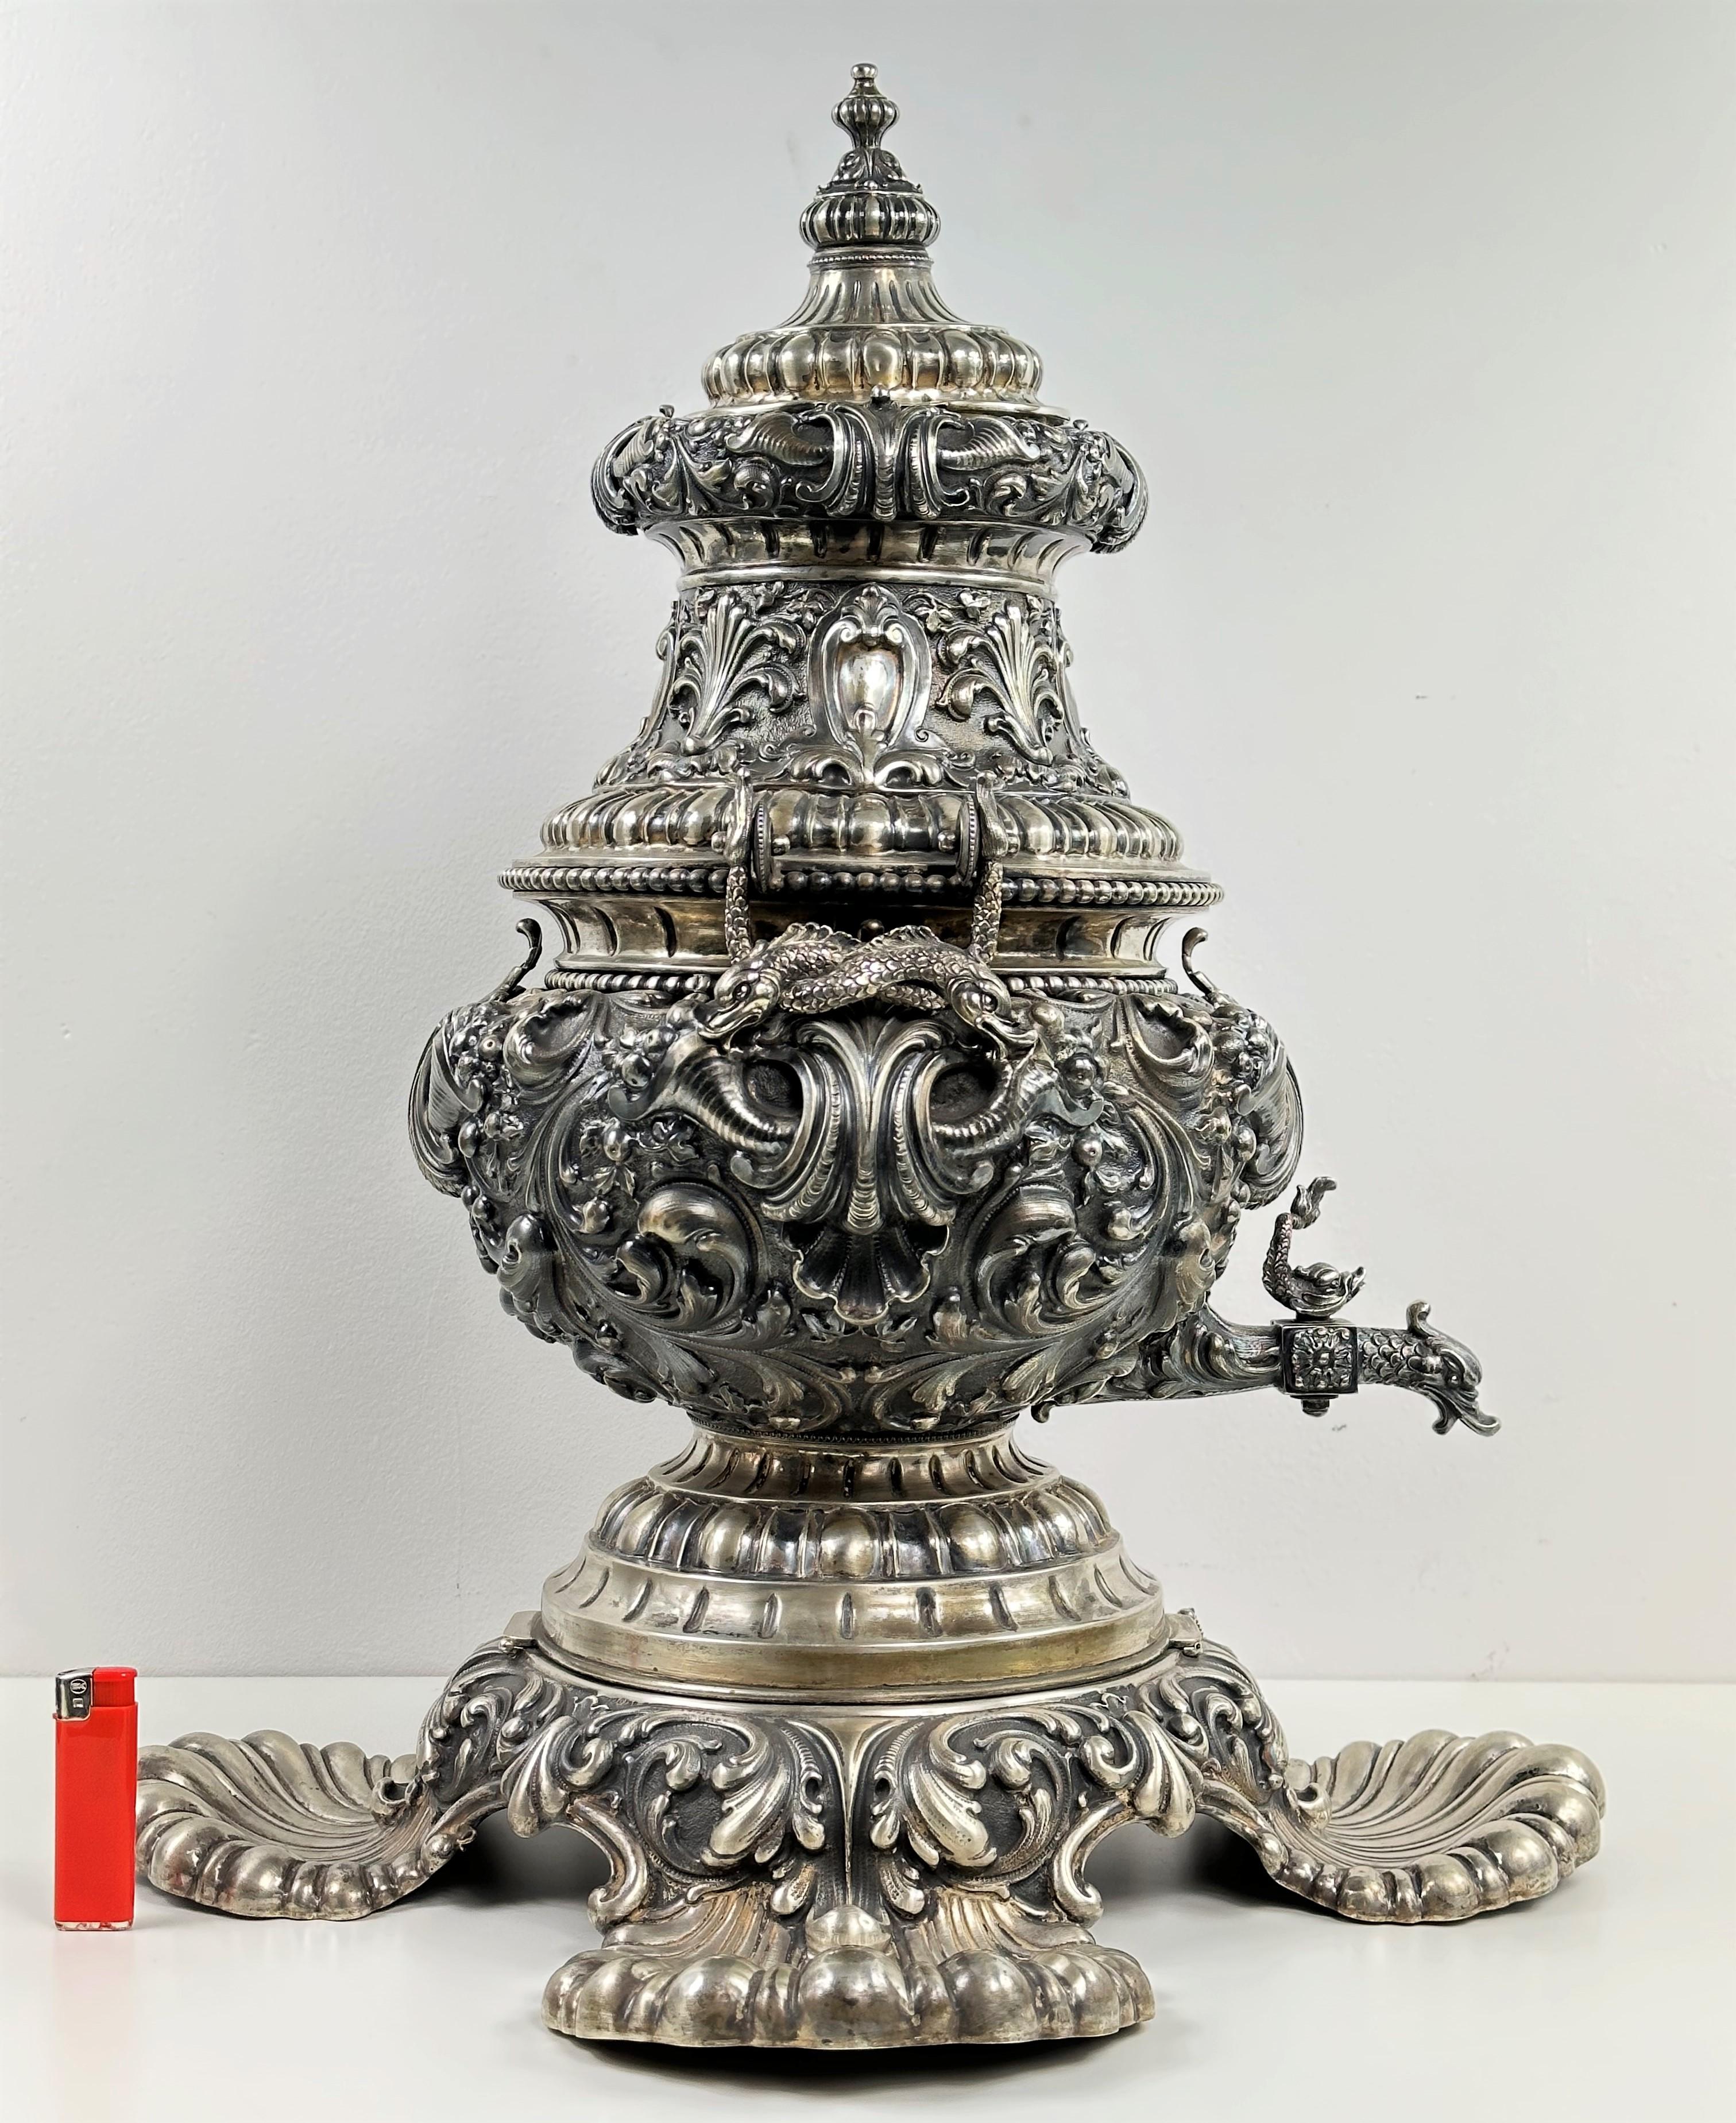 Incredible, very large .800 silver Italian samovar. Very carefully designed, high level of detail. With two dolphin-shaped handles. Weight 6.5 kg

Dimensions:
height - 62 cm
base width - 52 cm
samovar width - 32 cm.